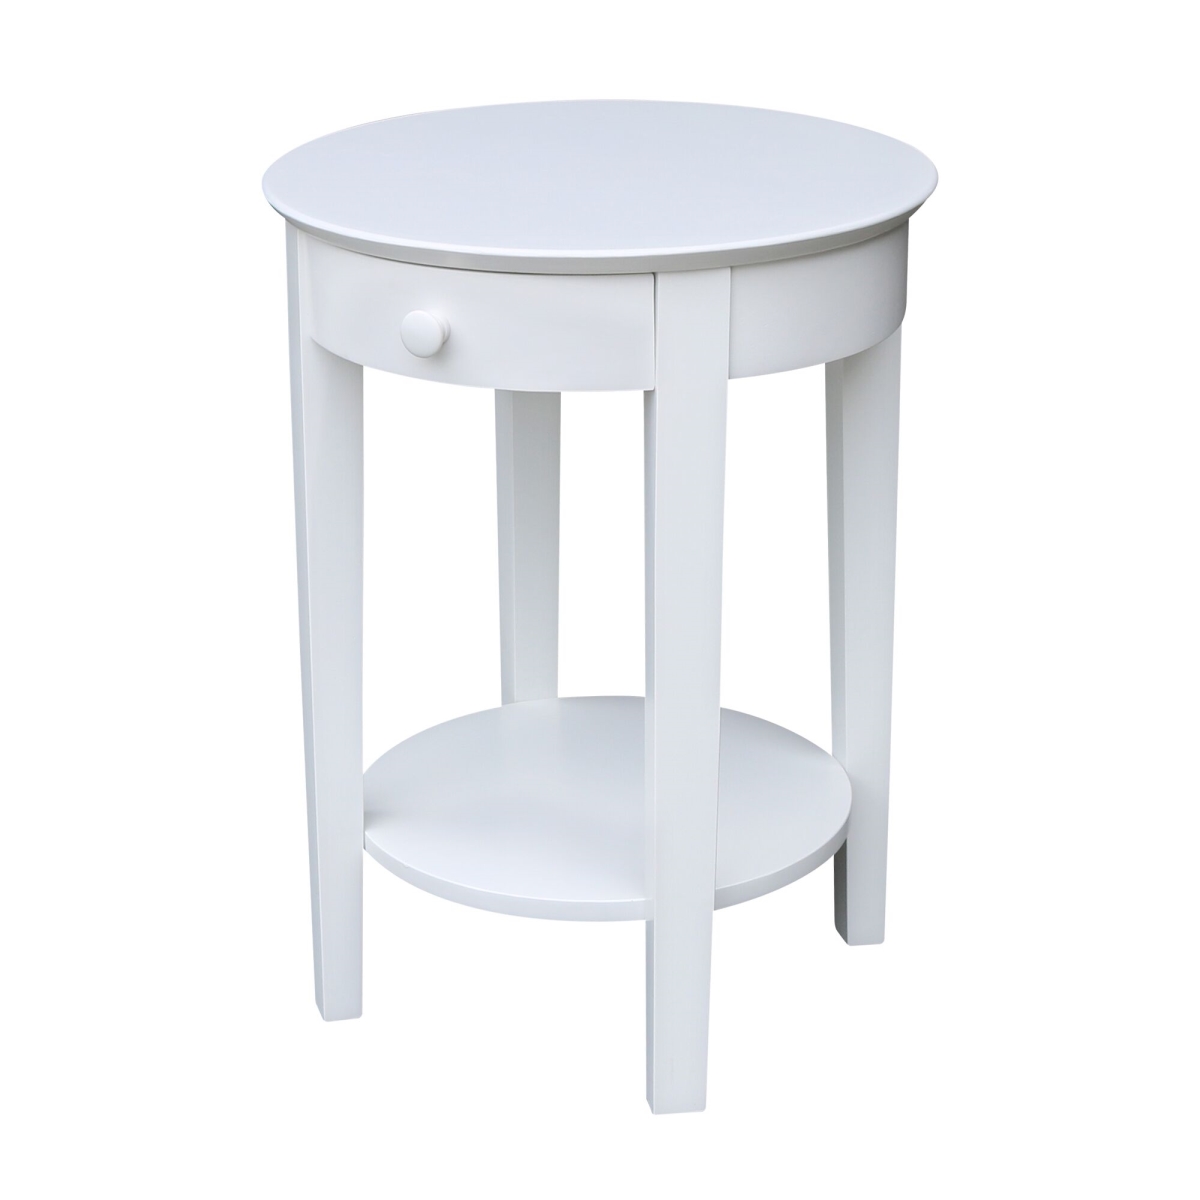 Ot08-2128 Phillips Accent Table With Drawer, White